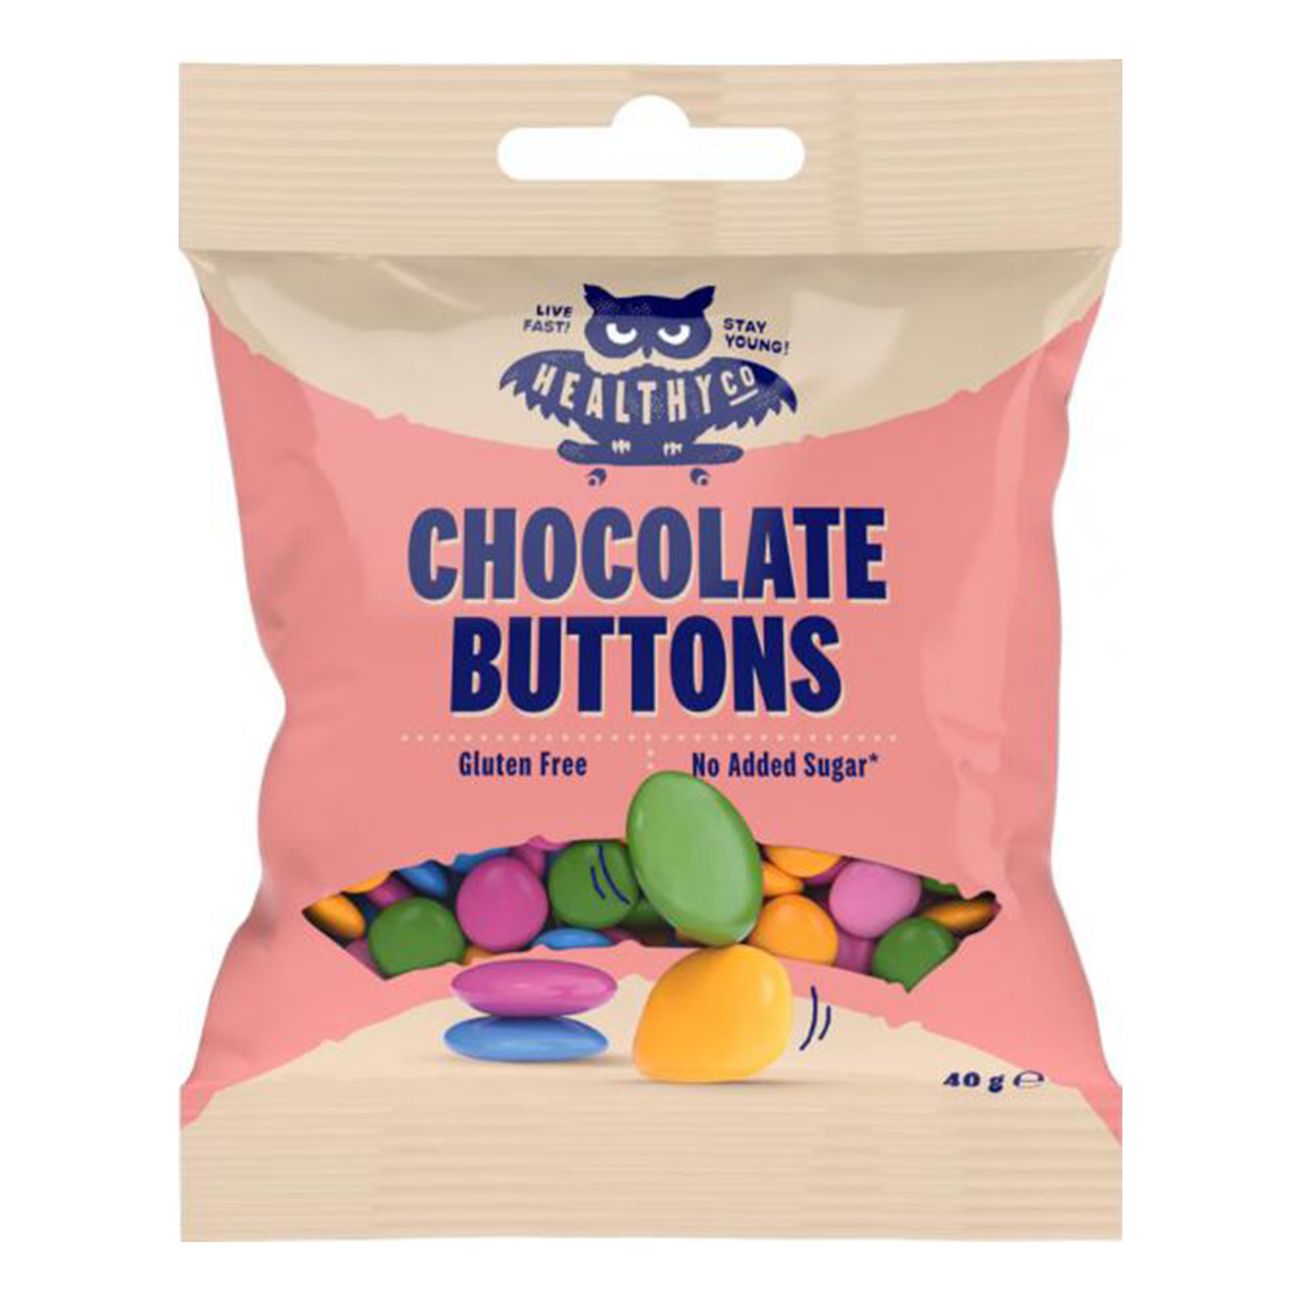 healthyco-chocolate-buttons-92496-1